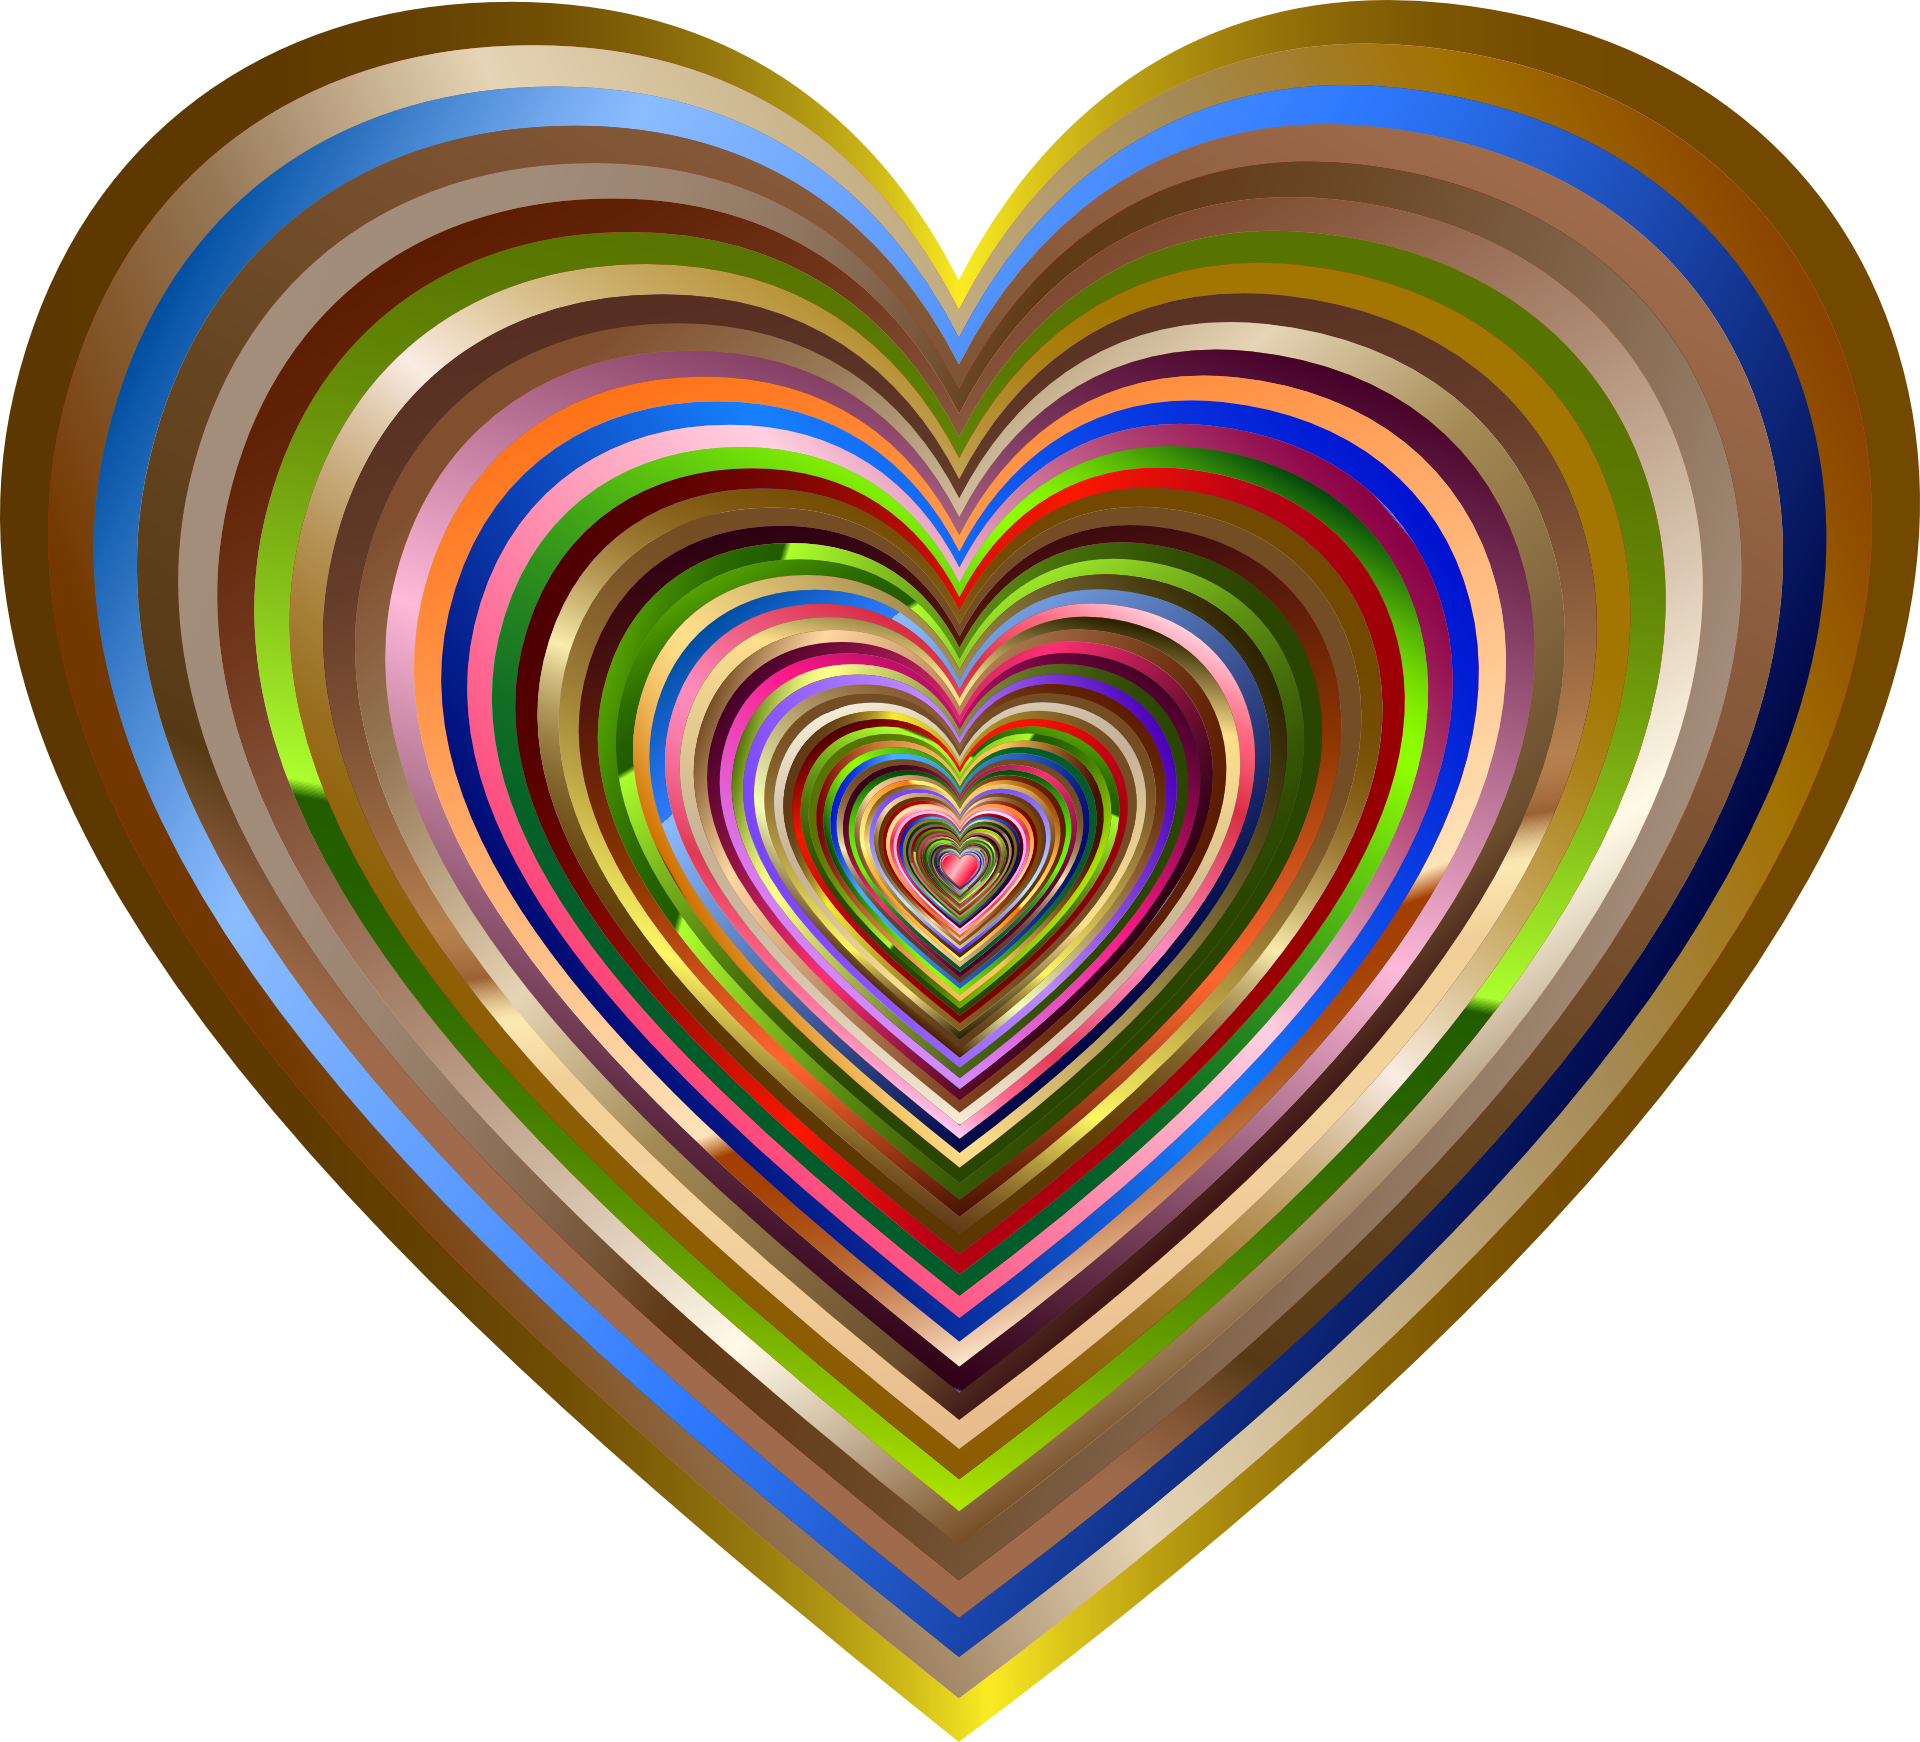 Colorful Heart With Abstract Pattern Free Image Download